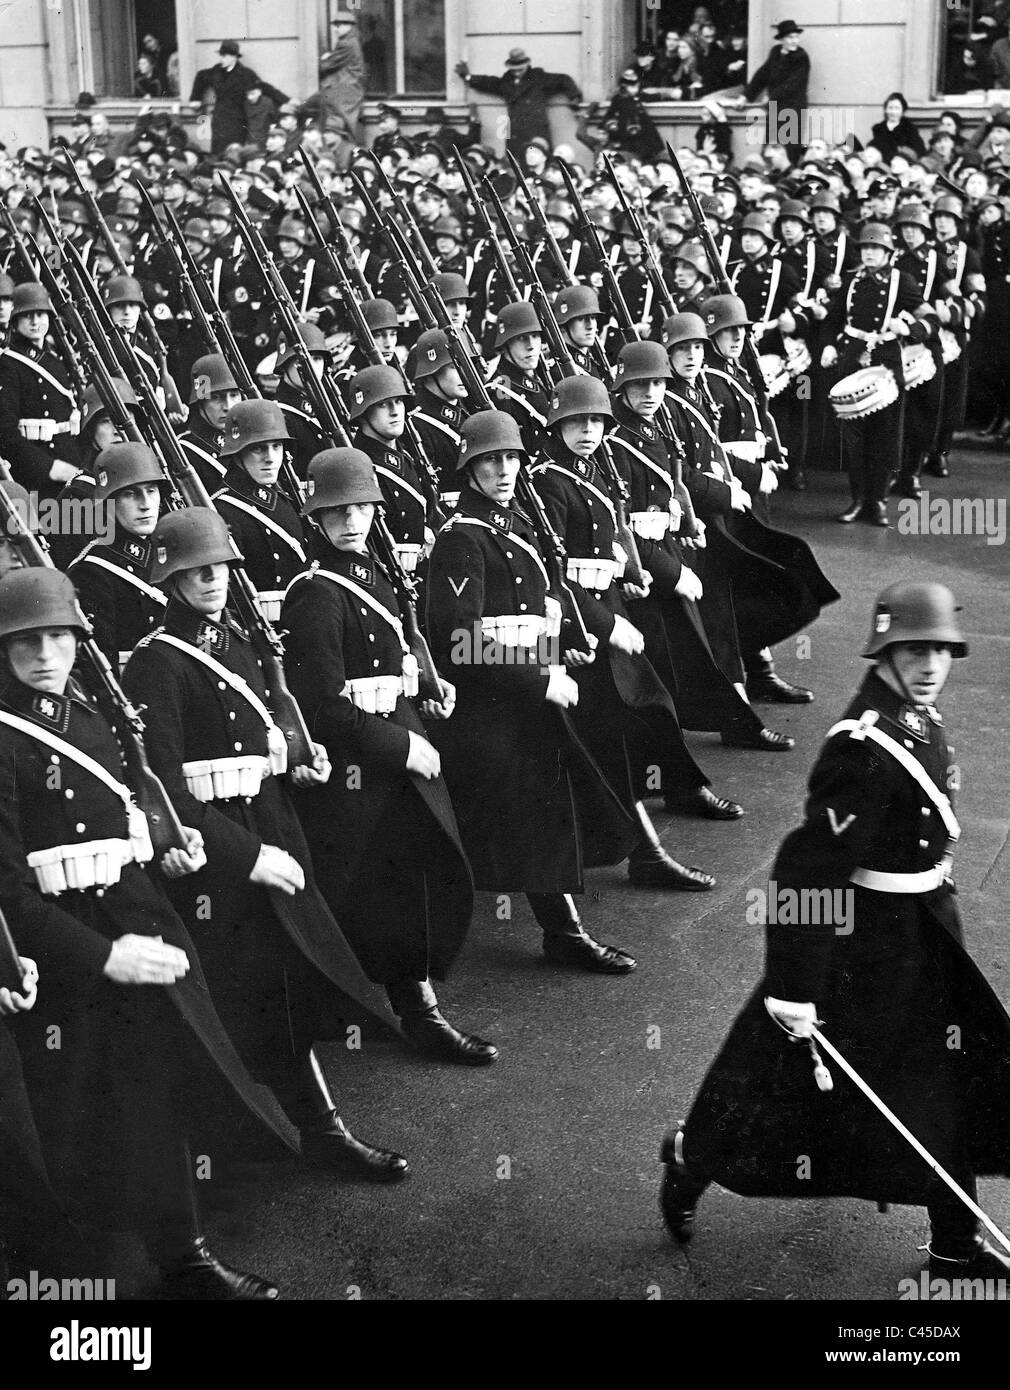 Parade of 'Leibstandarte-SS' on the anniversary of the Seizure of Power